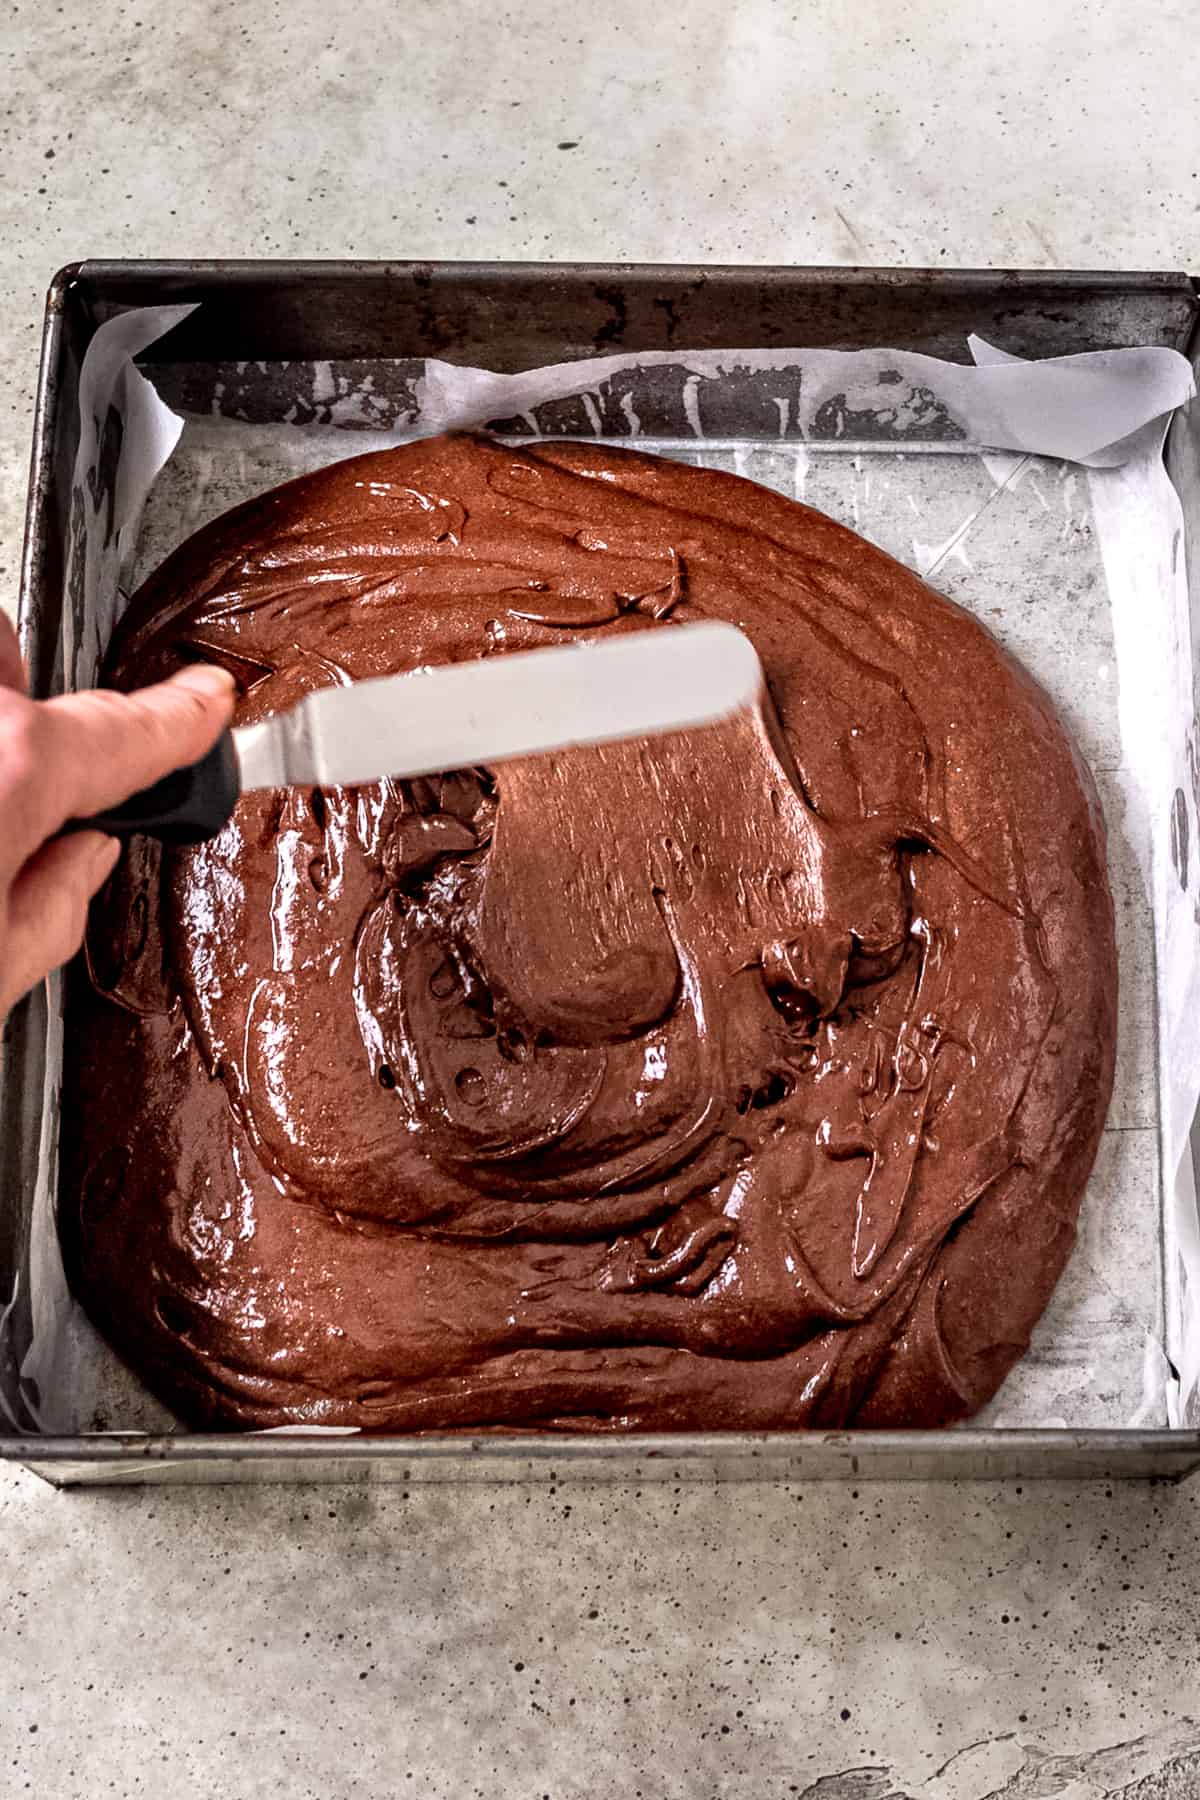 Brownie batter in a lined baking tin.